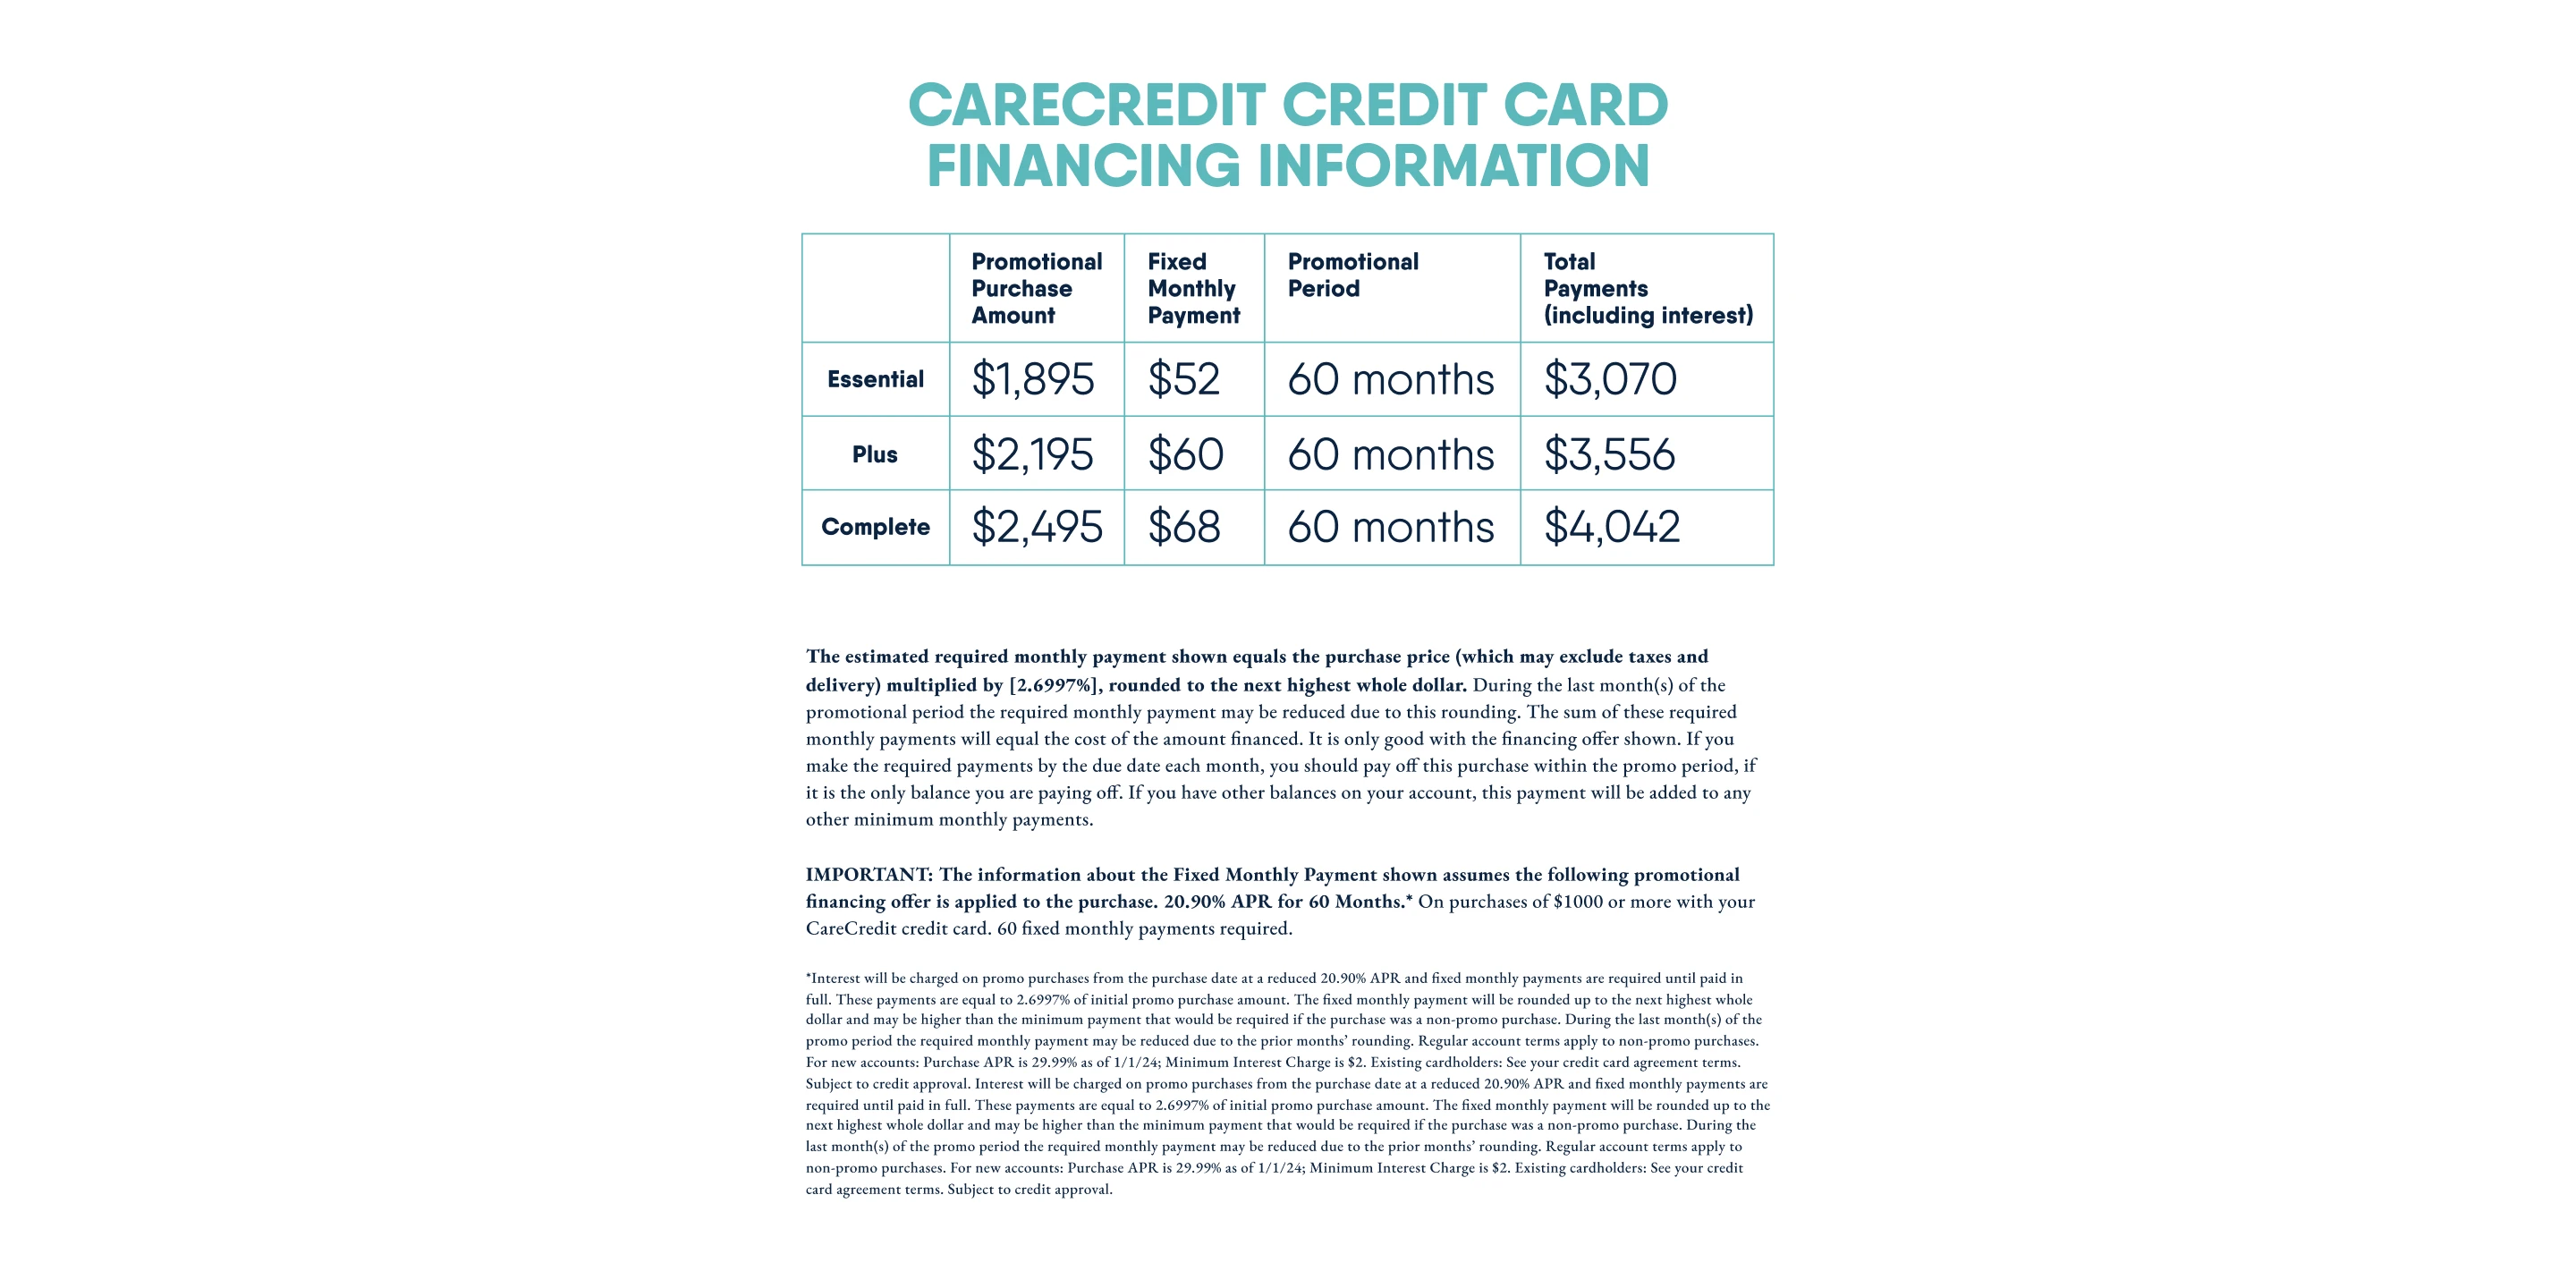 Motto CareCredit Terms and Conditions. 